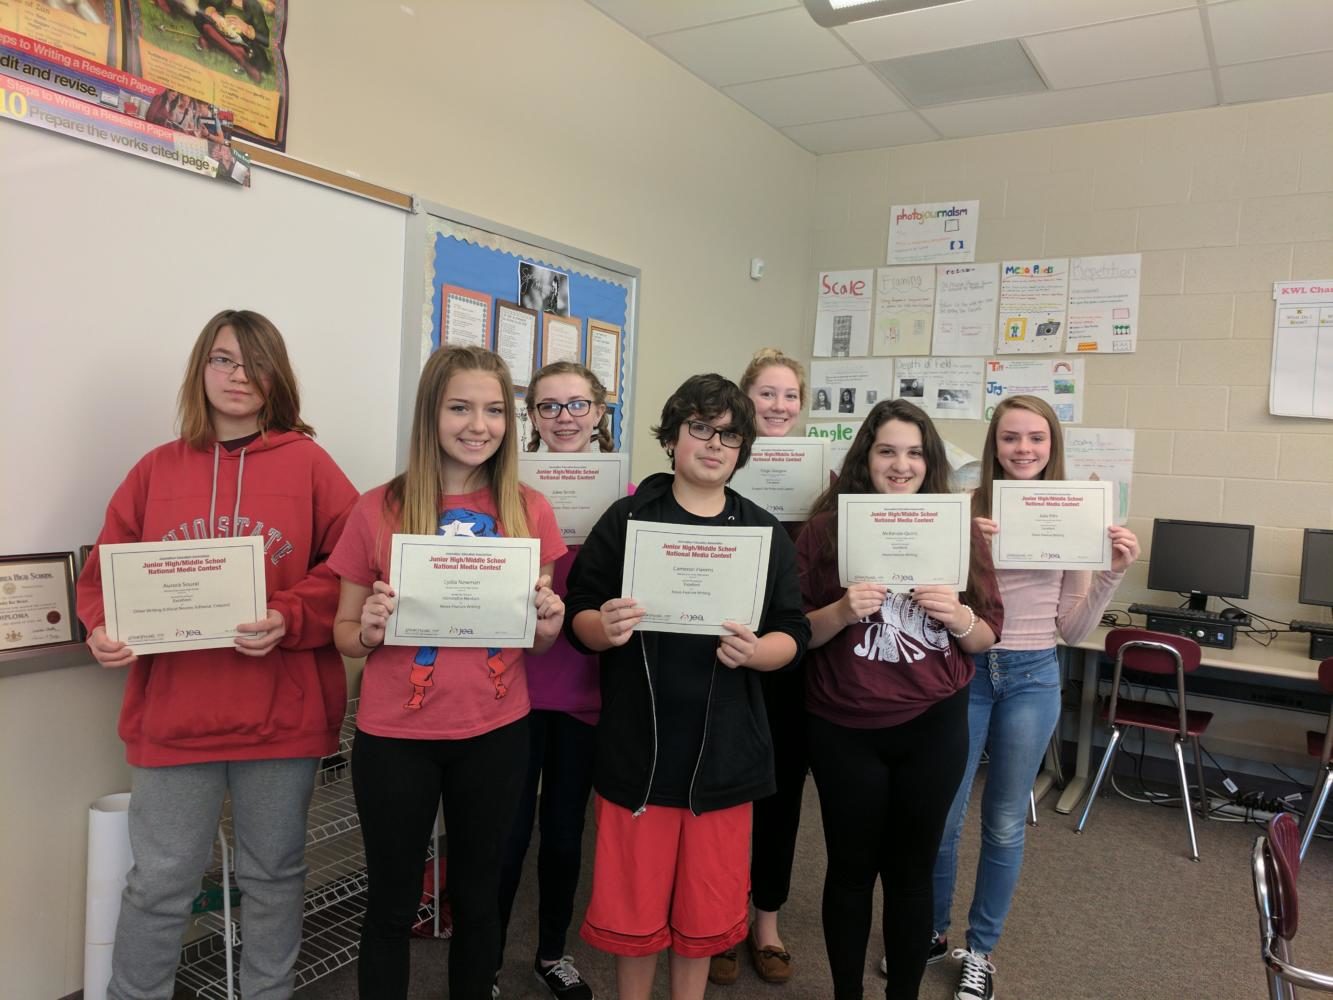 Aurora Soural, Lydia Newman, Jolee Smith, Cameron Havens, Paige Glasgow, Mckenzie Quirin and Julia Pitts display certificates recognizing their ratings for the National Media Contest. (pictured from left to right)